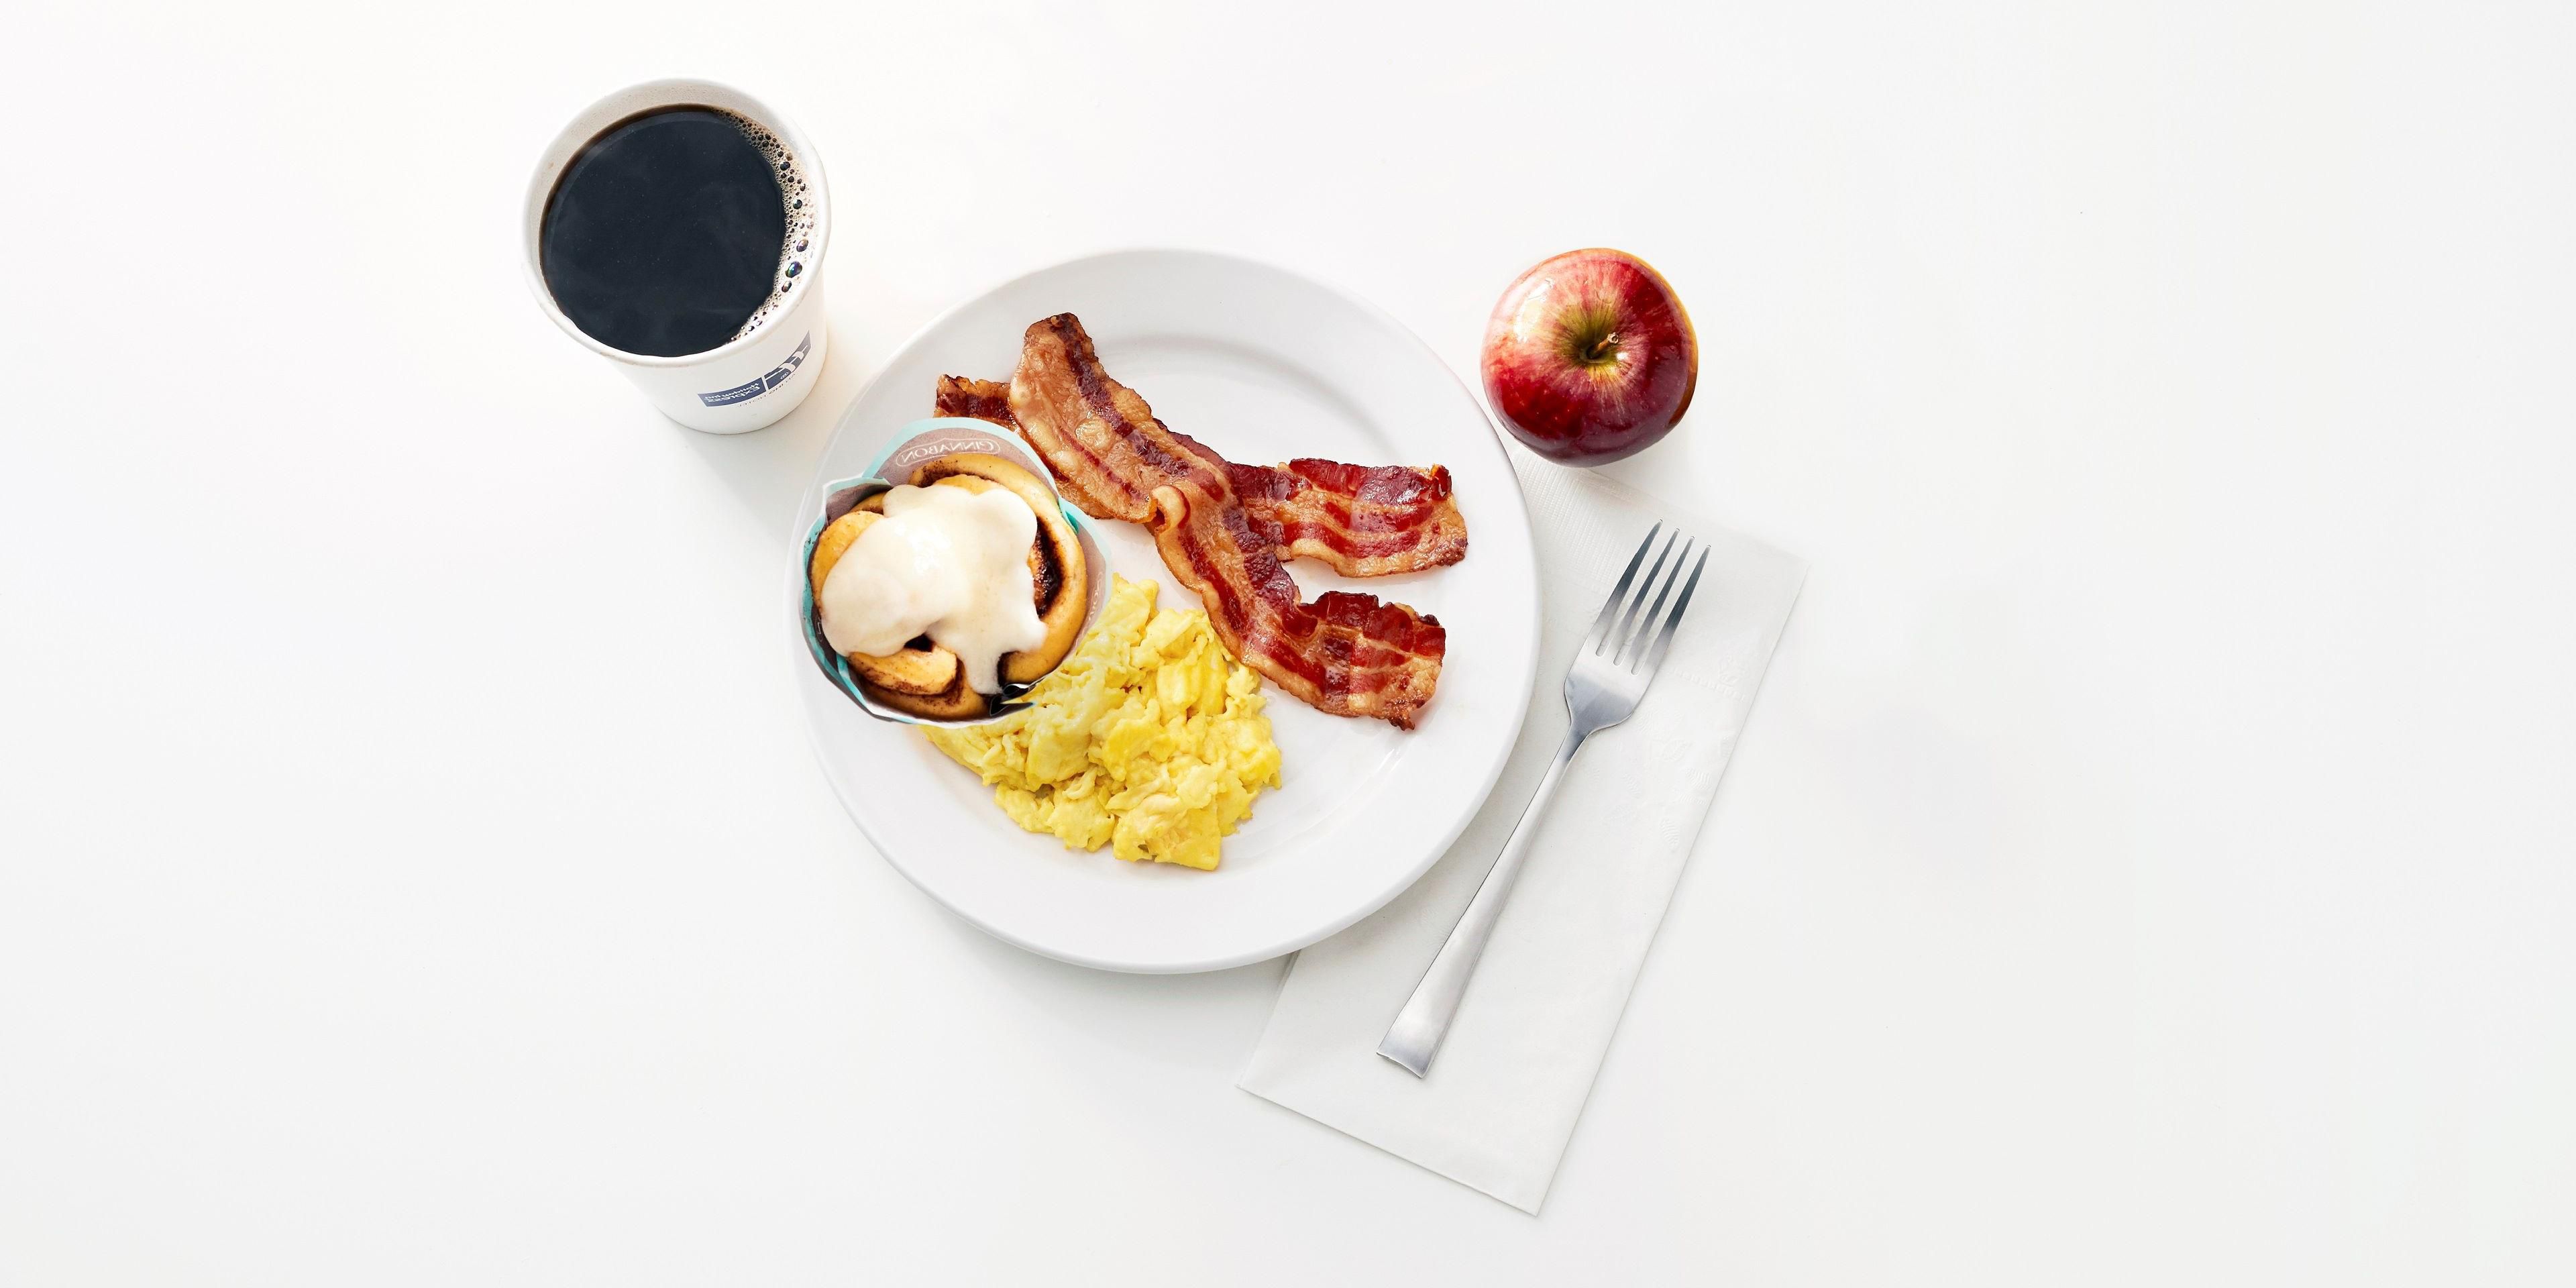 Kick start your day with our Express Start Breakfast, with grab ‘n’ go options and favourites such as eggs and bacon, hot pancakes, our signature cinnamon rolls and fresh coffee. Offered Monday to Friday, 6:30 AM – 9:00 AM; Saturday and Sunday, 7:00 AM – 10:00 AM.